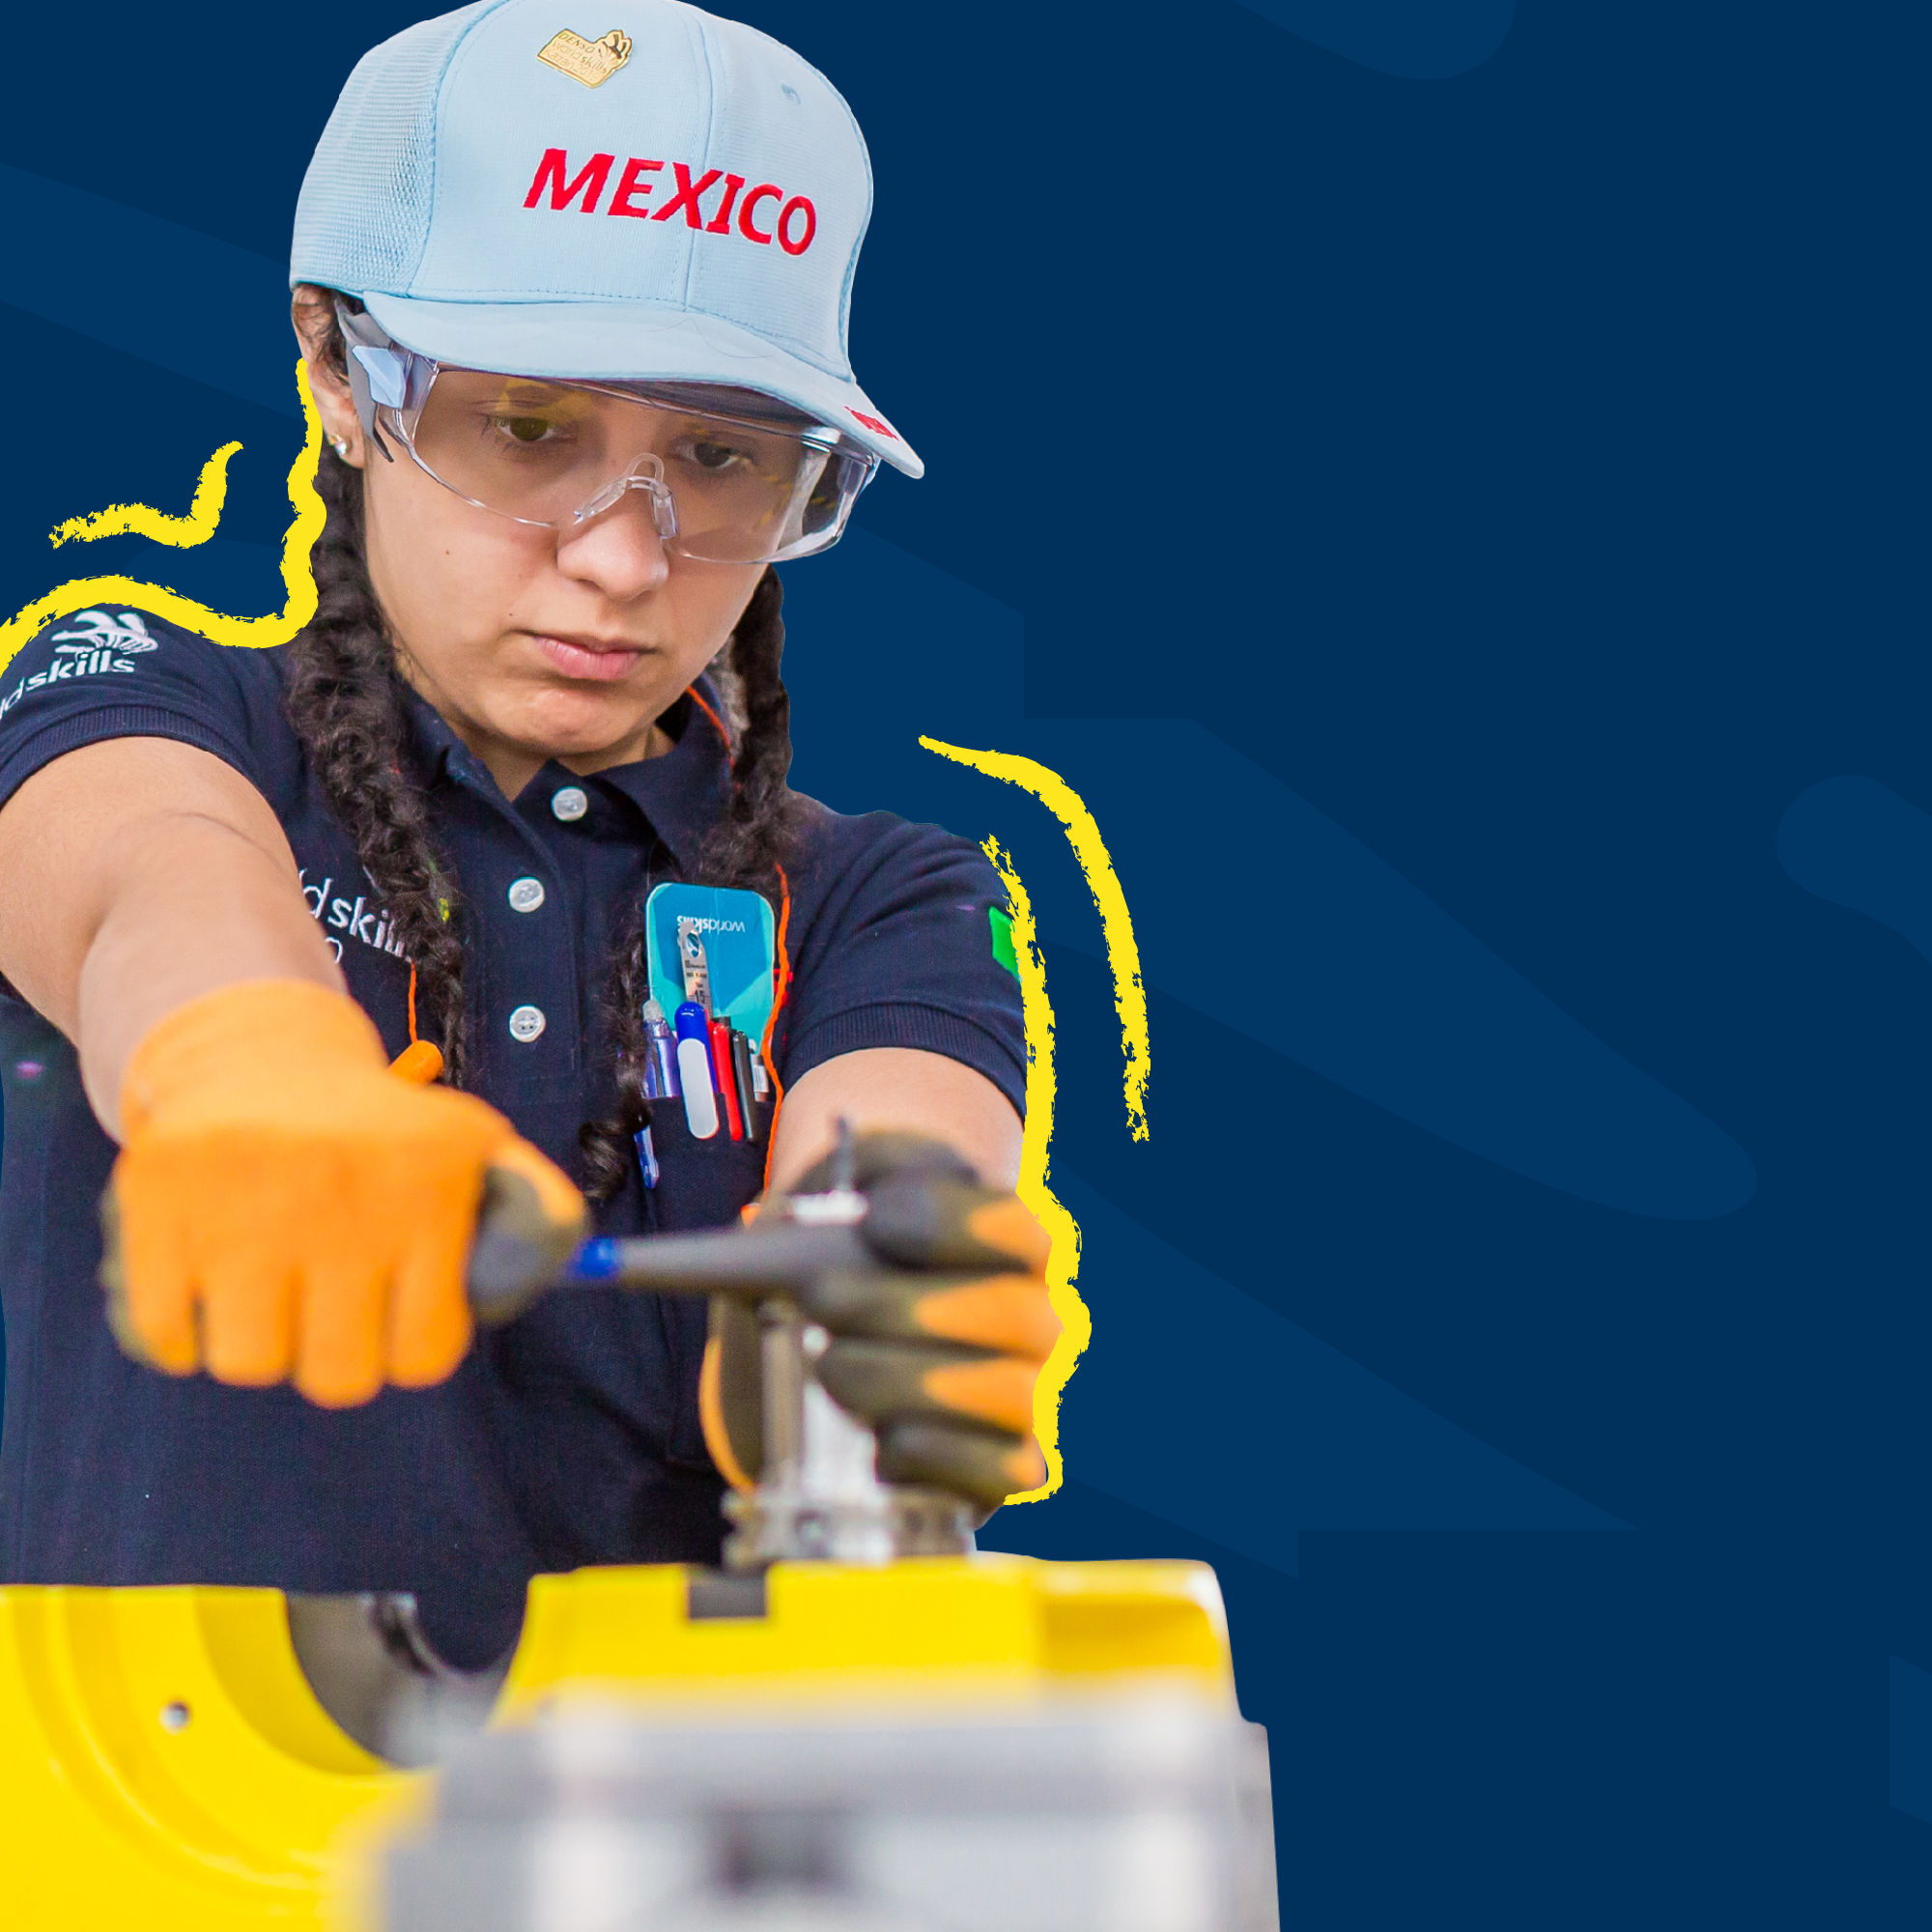 A female WorldSkills Competitor from Mexico turning a connection with a tool.